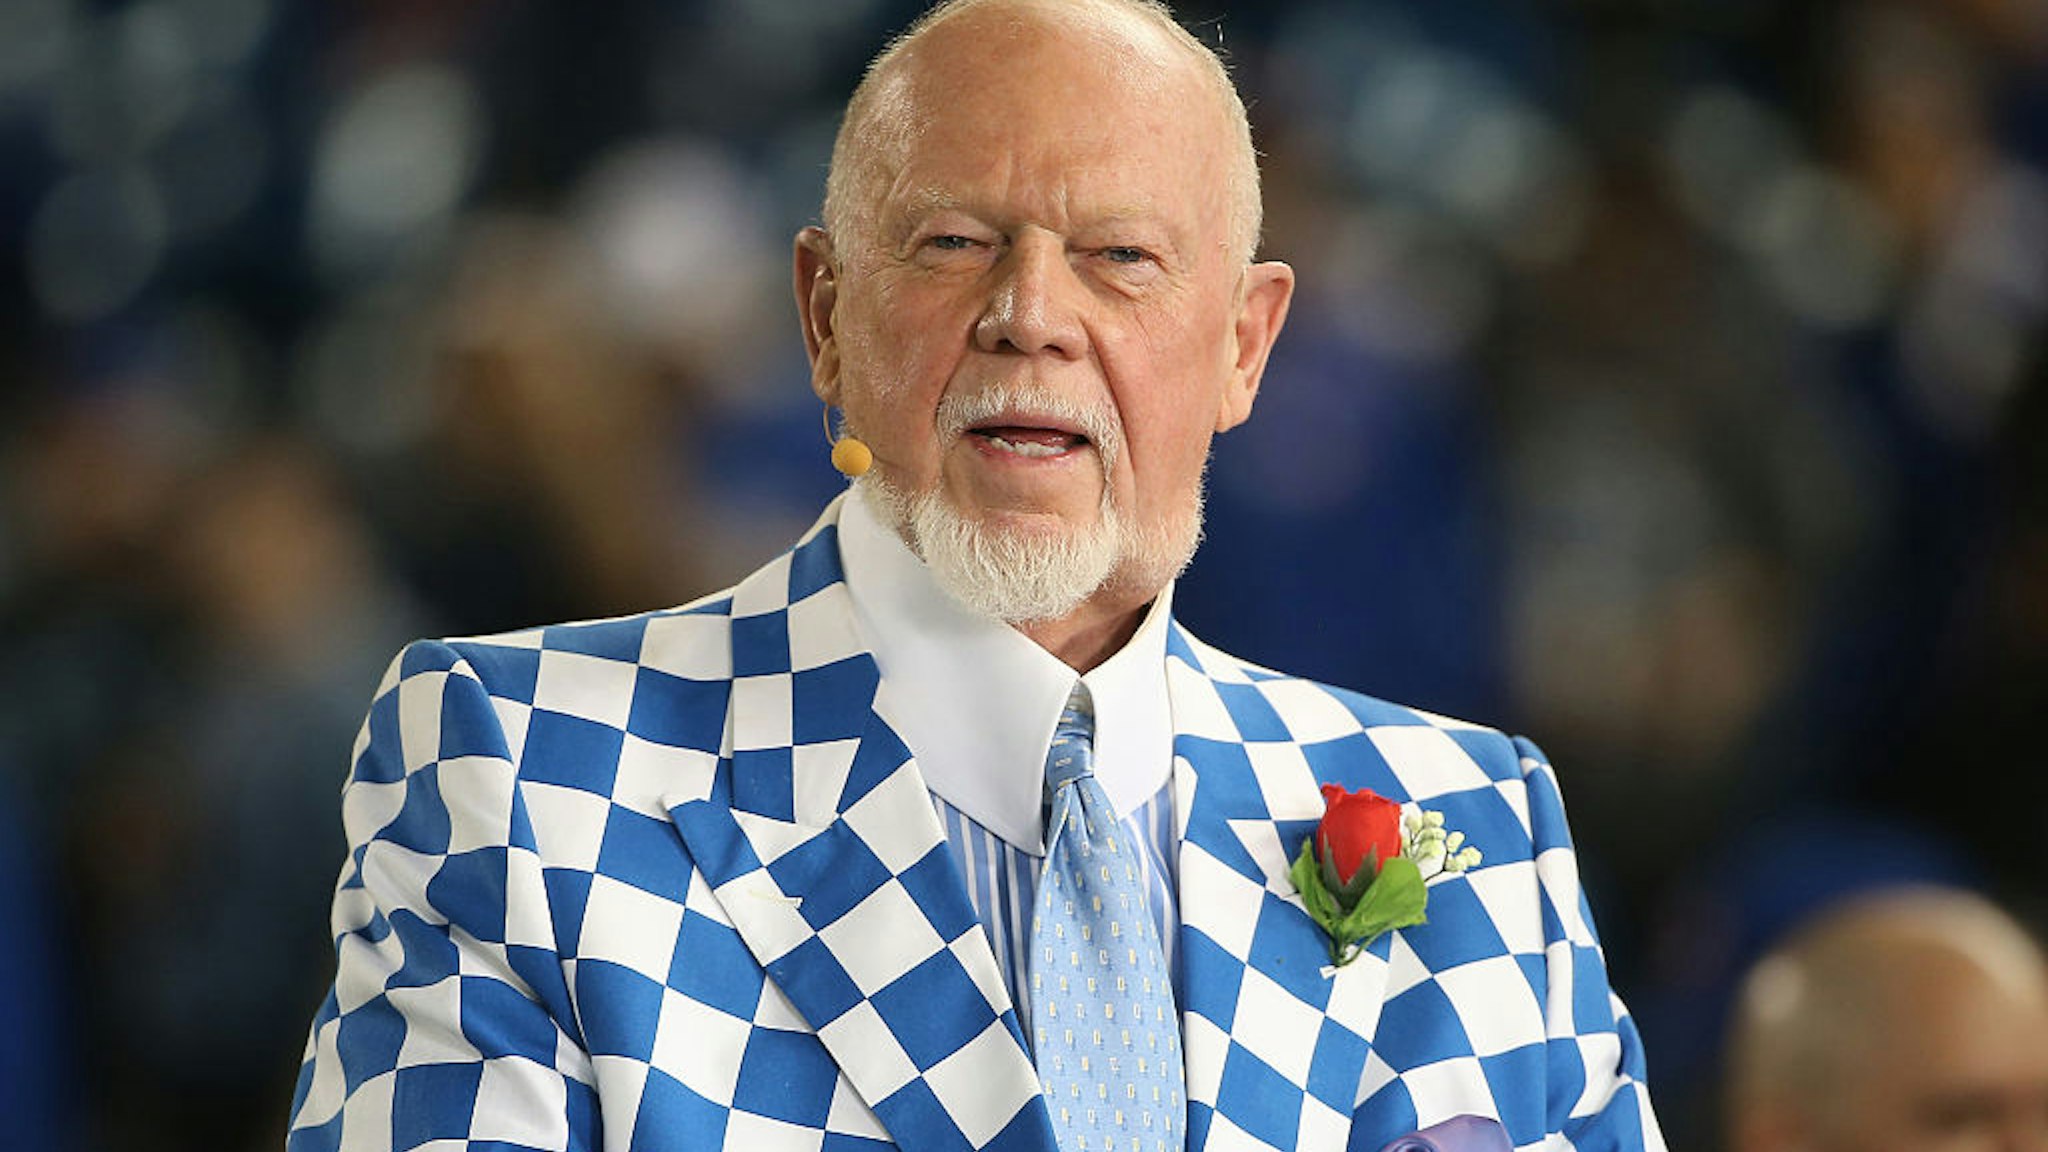 TORONTO, CANADA - APRIL 13: Hockey commentator Don Cherry does a television interview before the Tampa Bay Rays MLB game against the Toronto Blue Jays on April 13, 2015 at Rogers Centre in Toronto, Ontario, Canada.